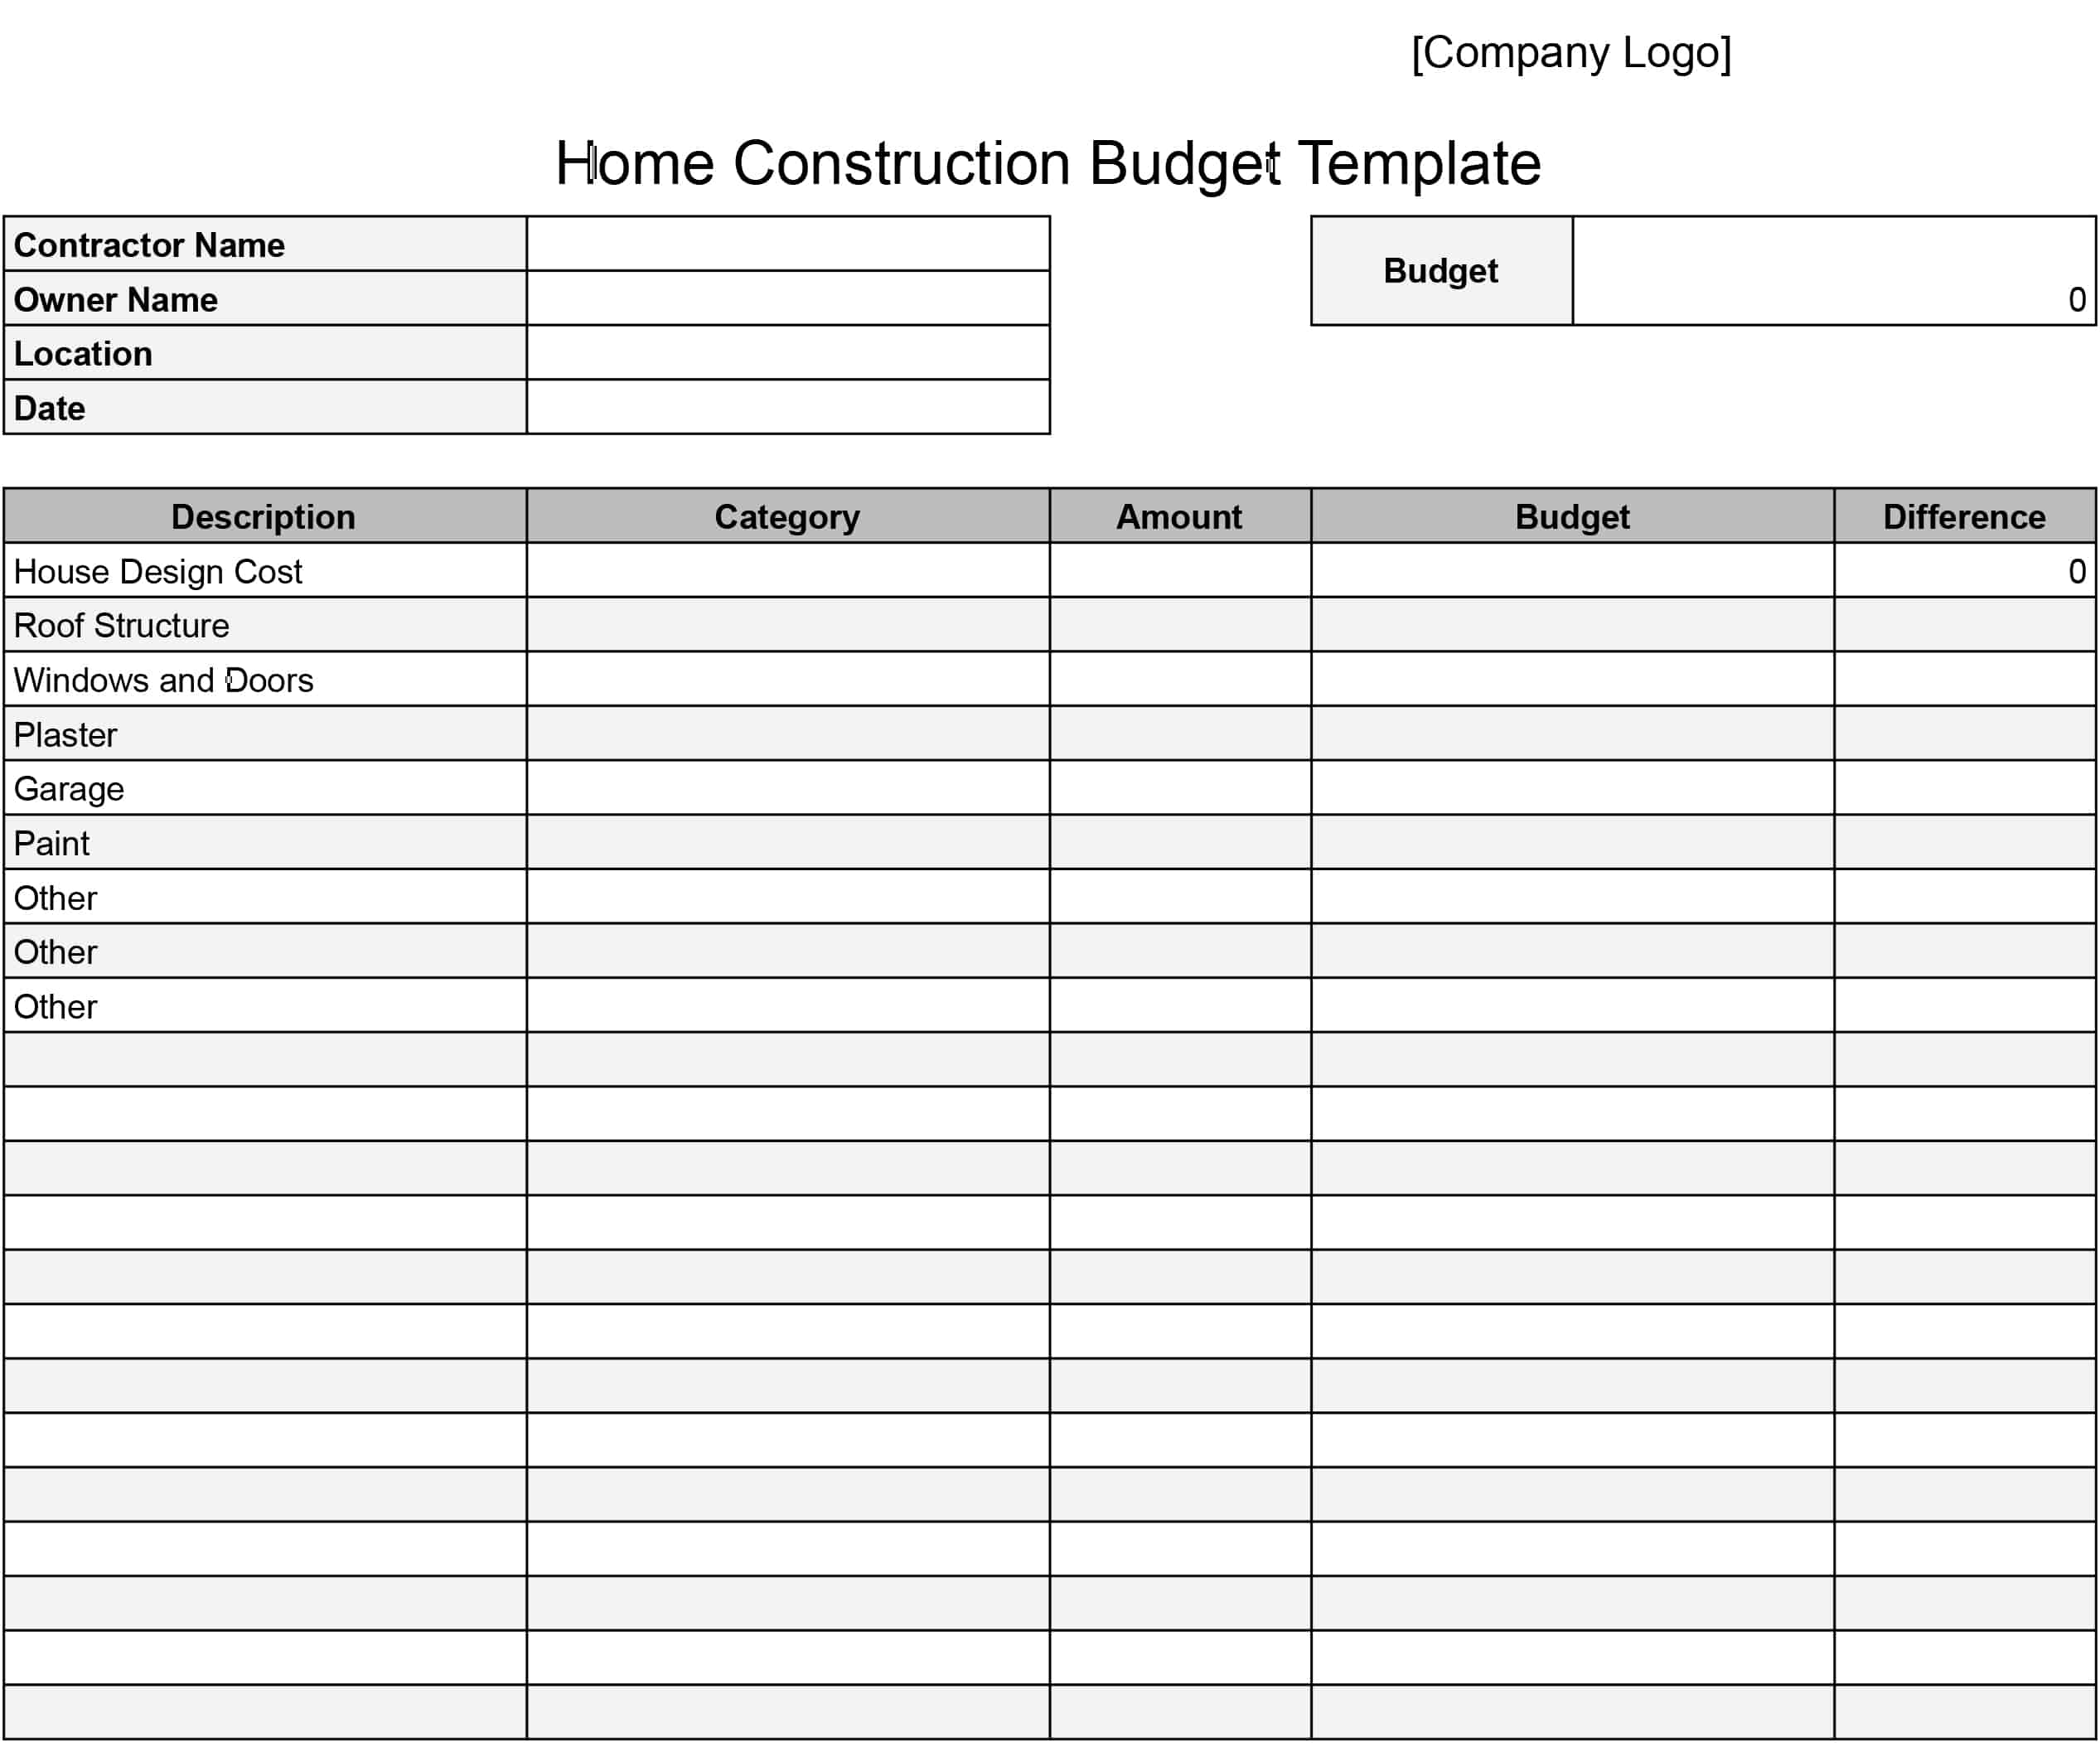 Home Construction Budget Template